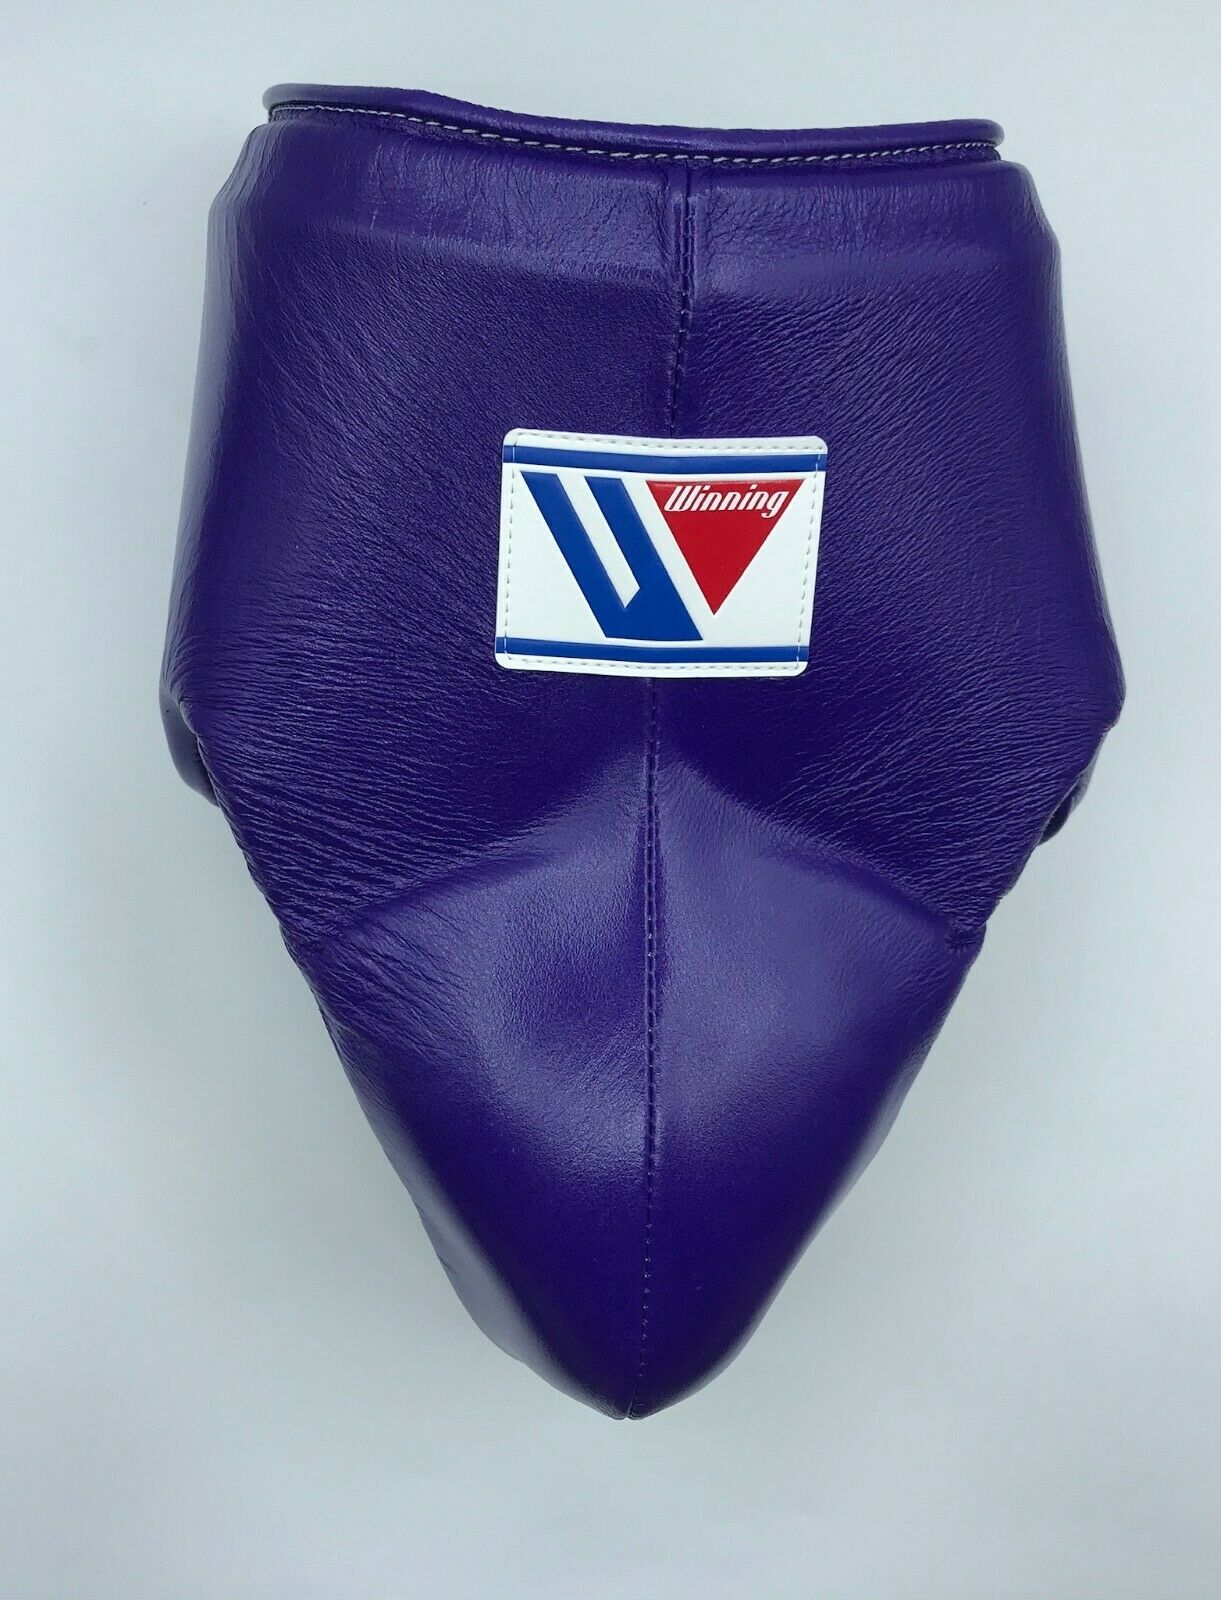 Authentic Winning Boxing Groin Cup protector Purple M size CPS500 from JAPAN -A